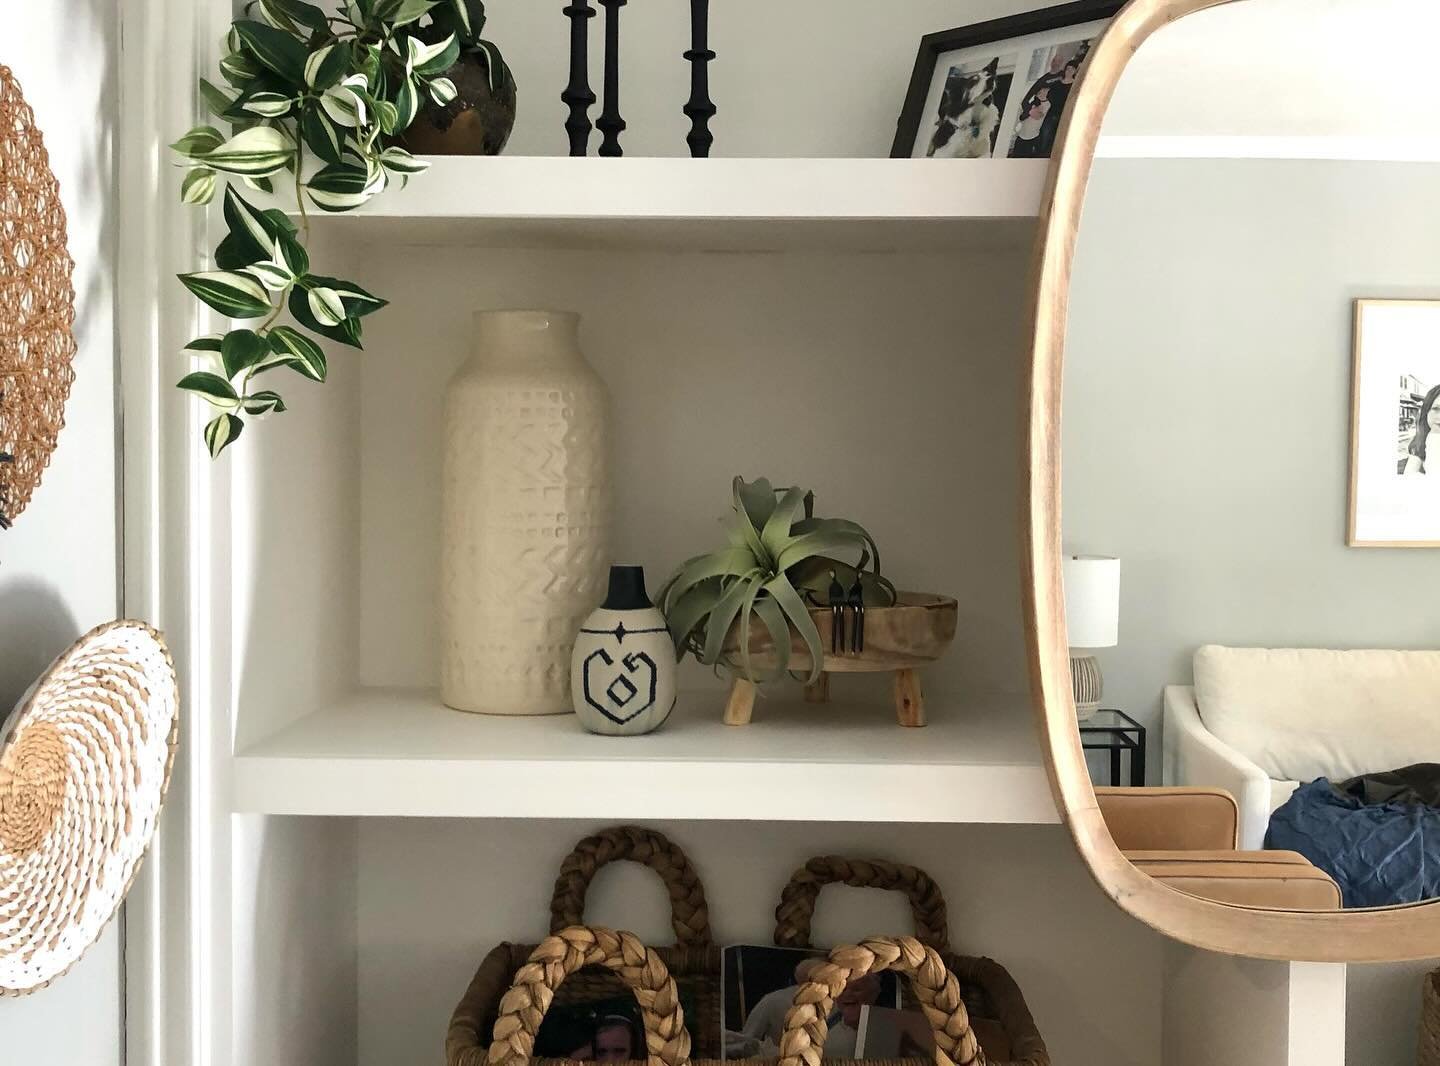 Styling bits on some BIG BIG built ins! 

The two little people were in a small box, in another box, under a pile of art supplies originally on this shelf. They were a gift&hellip; and how cool are they, and now they&rsquo;re front and center where t